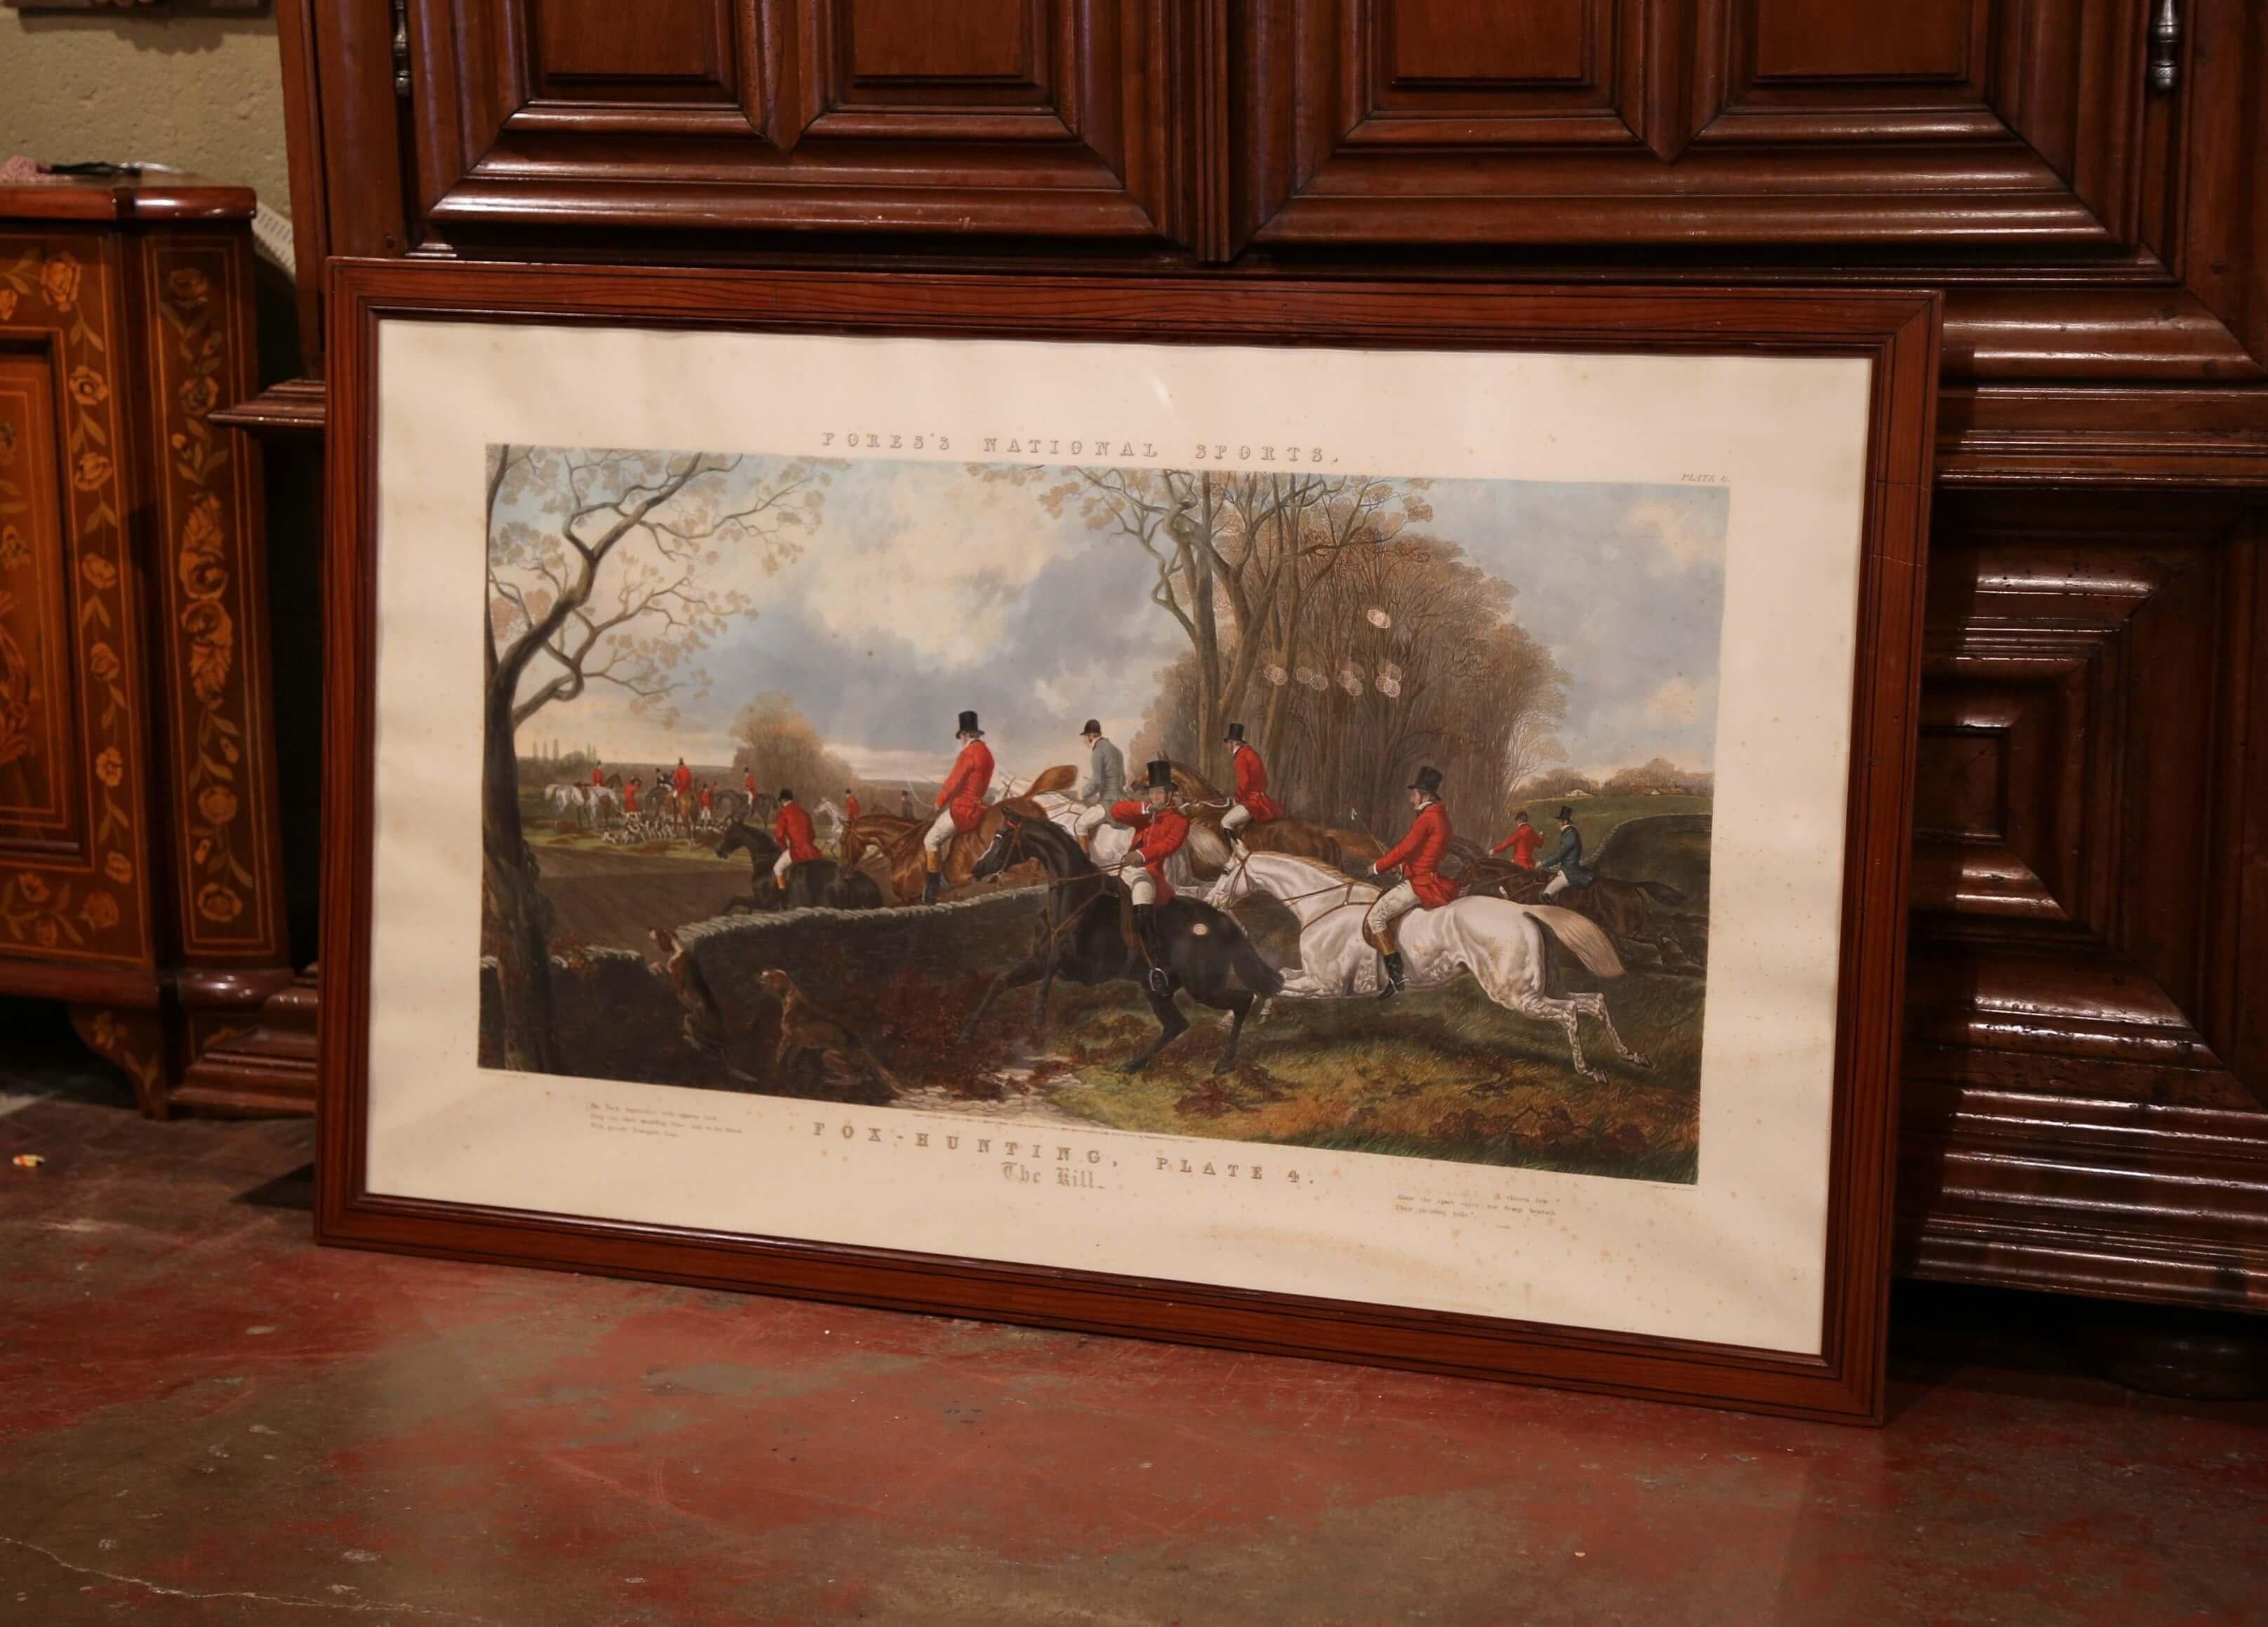 Large and colorful antique watercolor hunting scene under glass in wooden frame from England by Mess rs Fores; dated 1852, the art work features fox hunters on galloping horses with dog pack running beside them. The decorative wall hanging piece